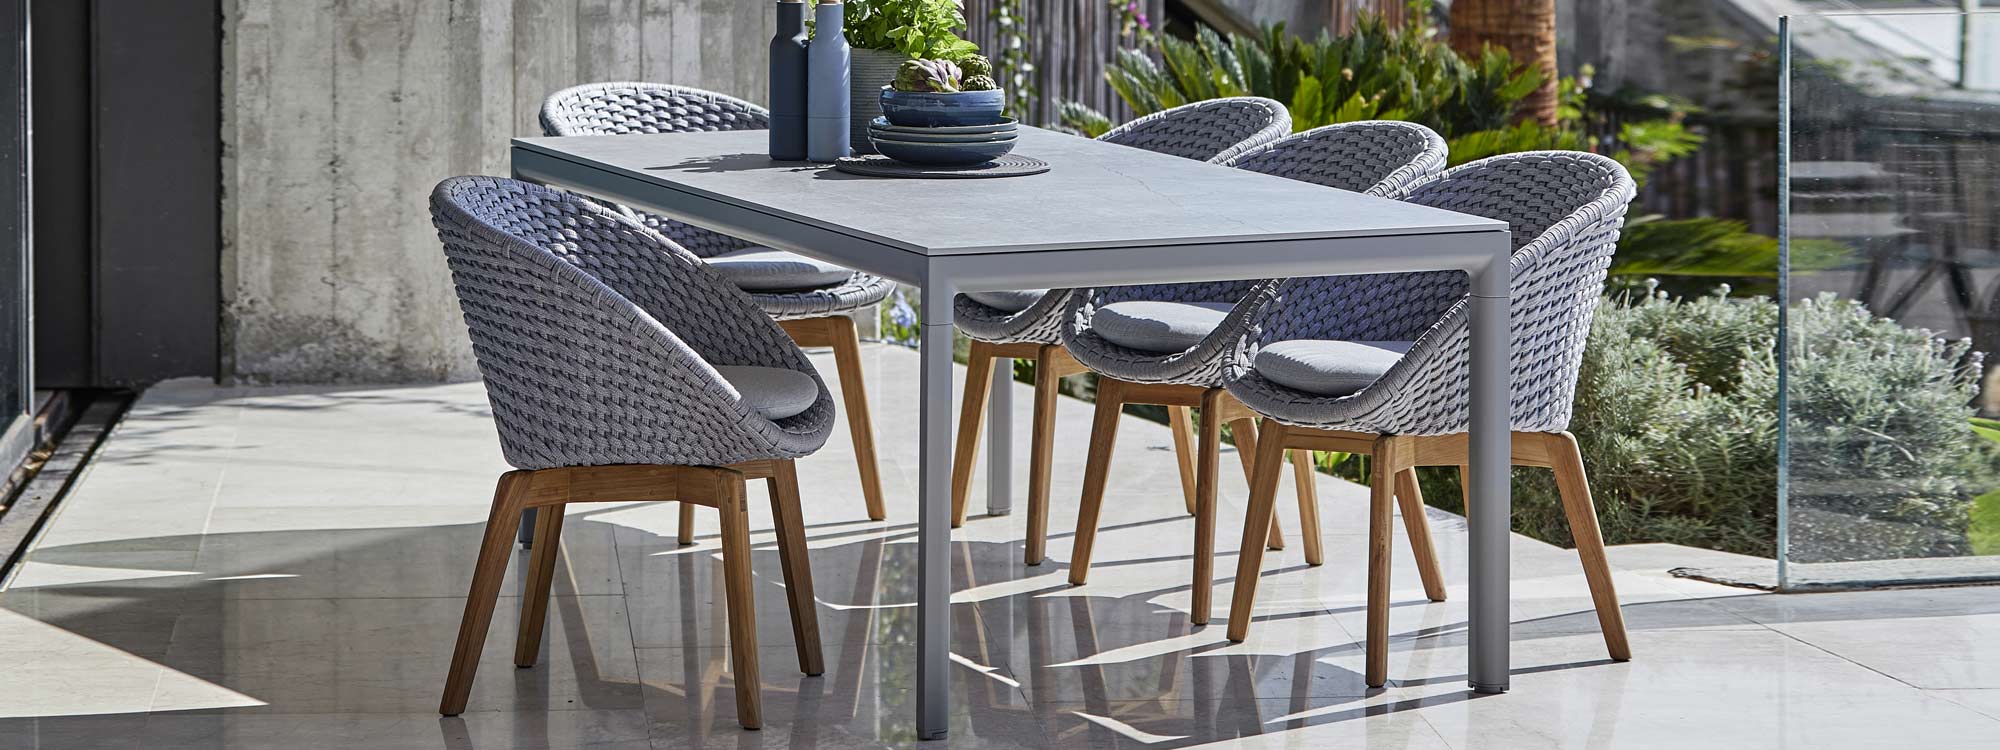 Image of light-grey Drop garden table and light-grey and teak Peacock garden chairs by Cane-line